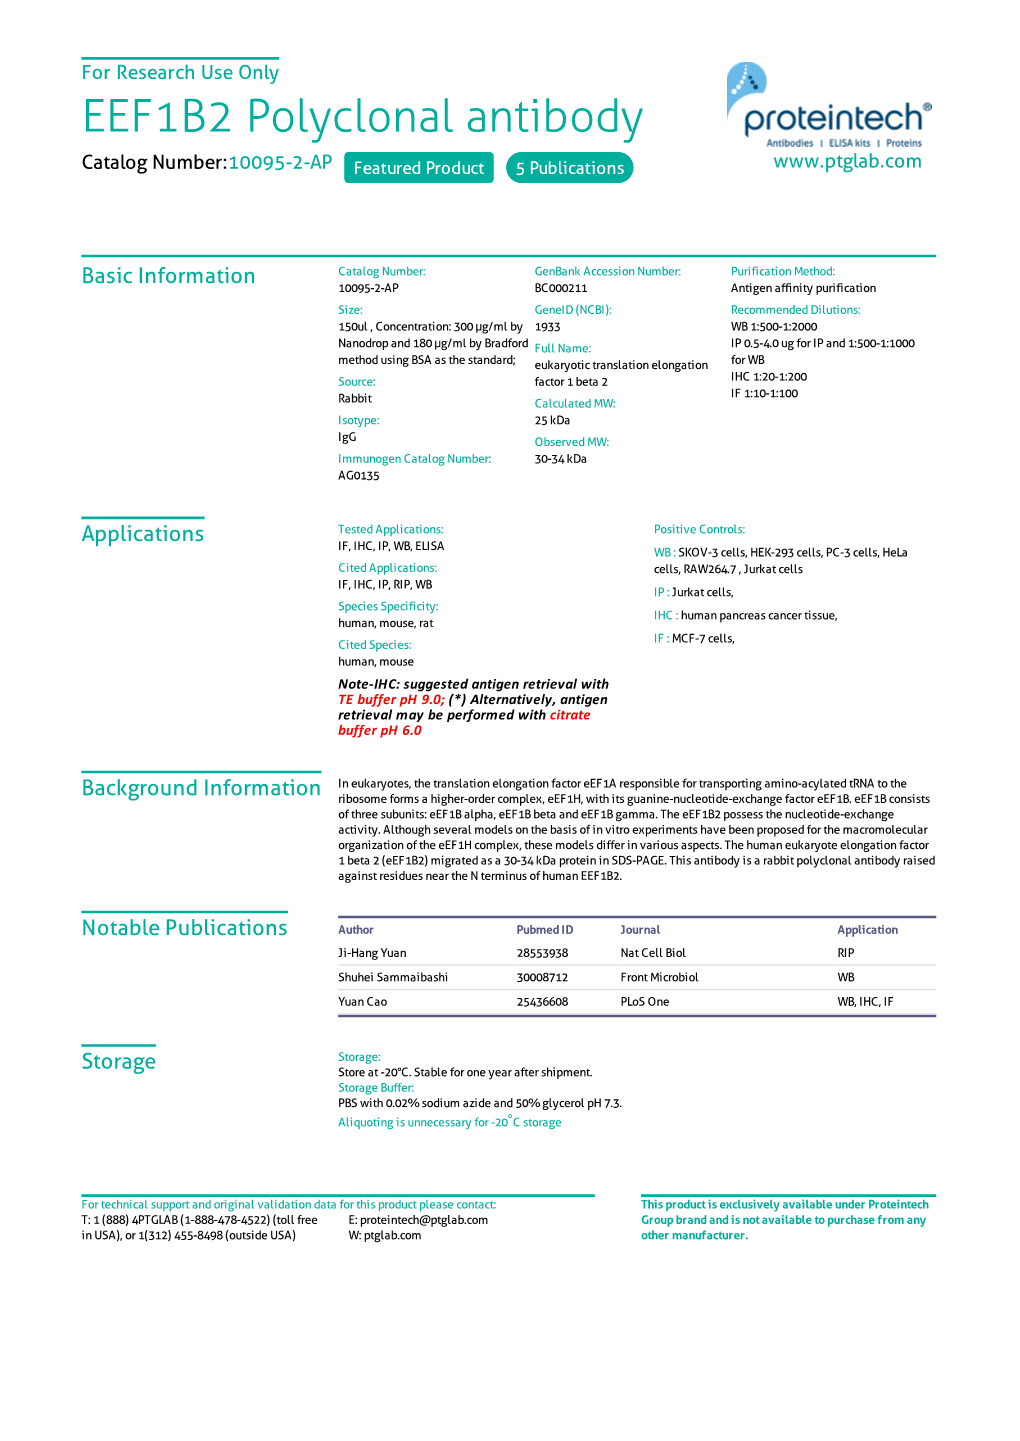 EEF1B2 Polyclonal Antibody Catalog Number:10095-2-AP Featured Product 5 Publications